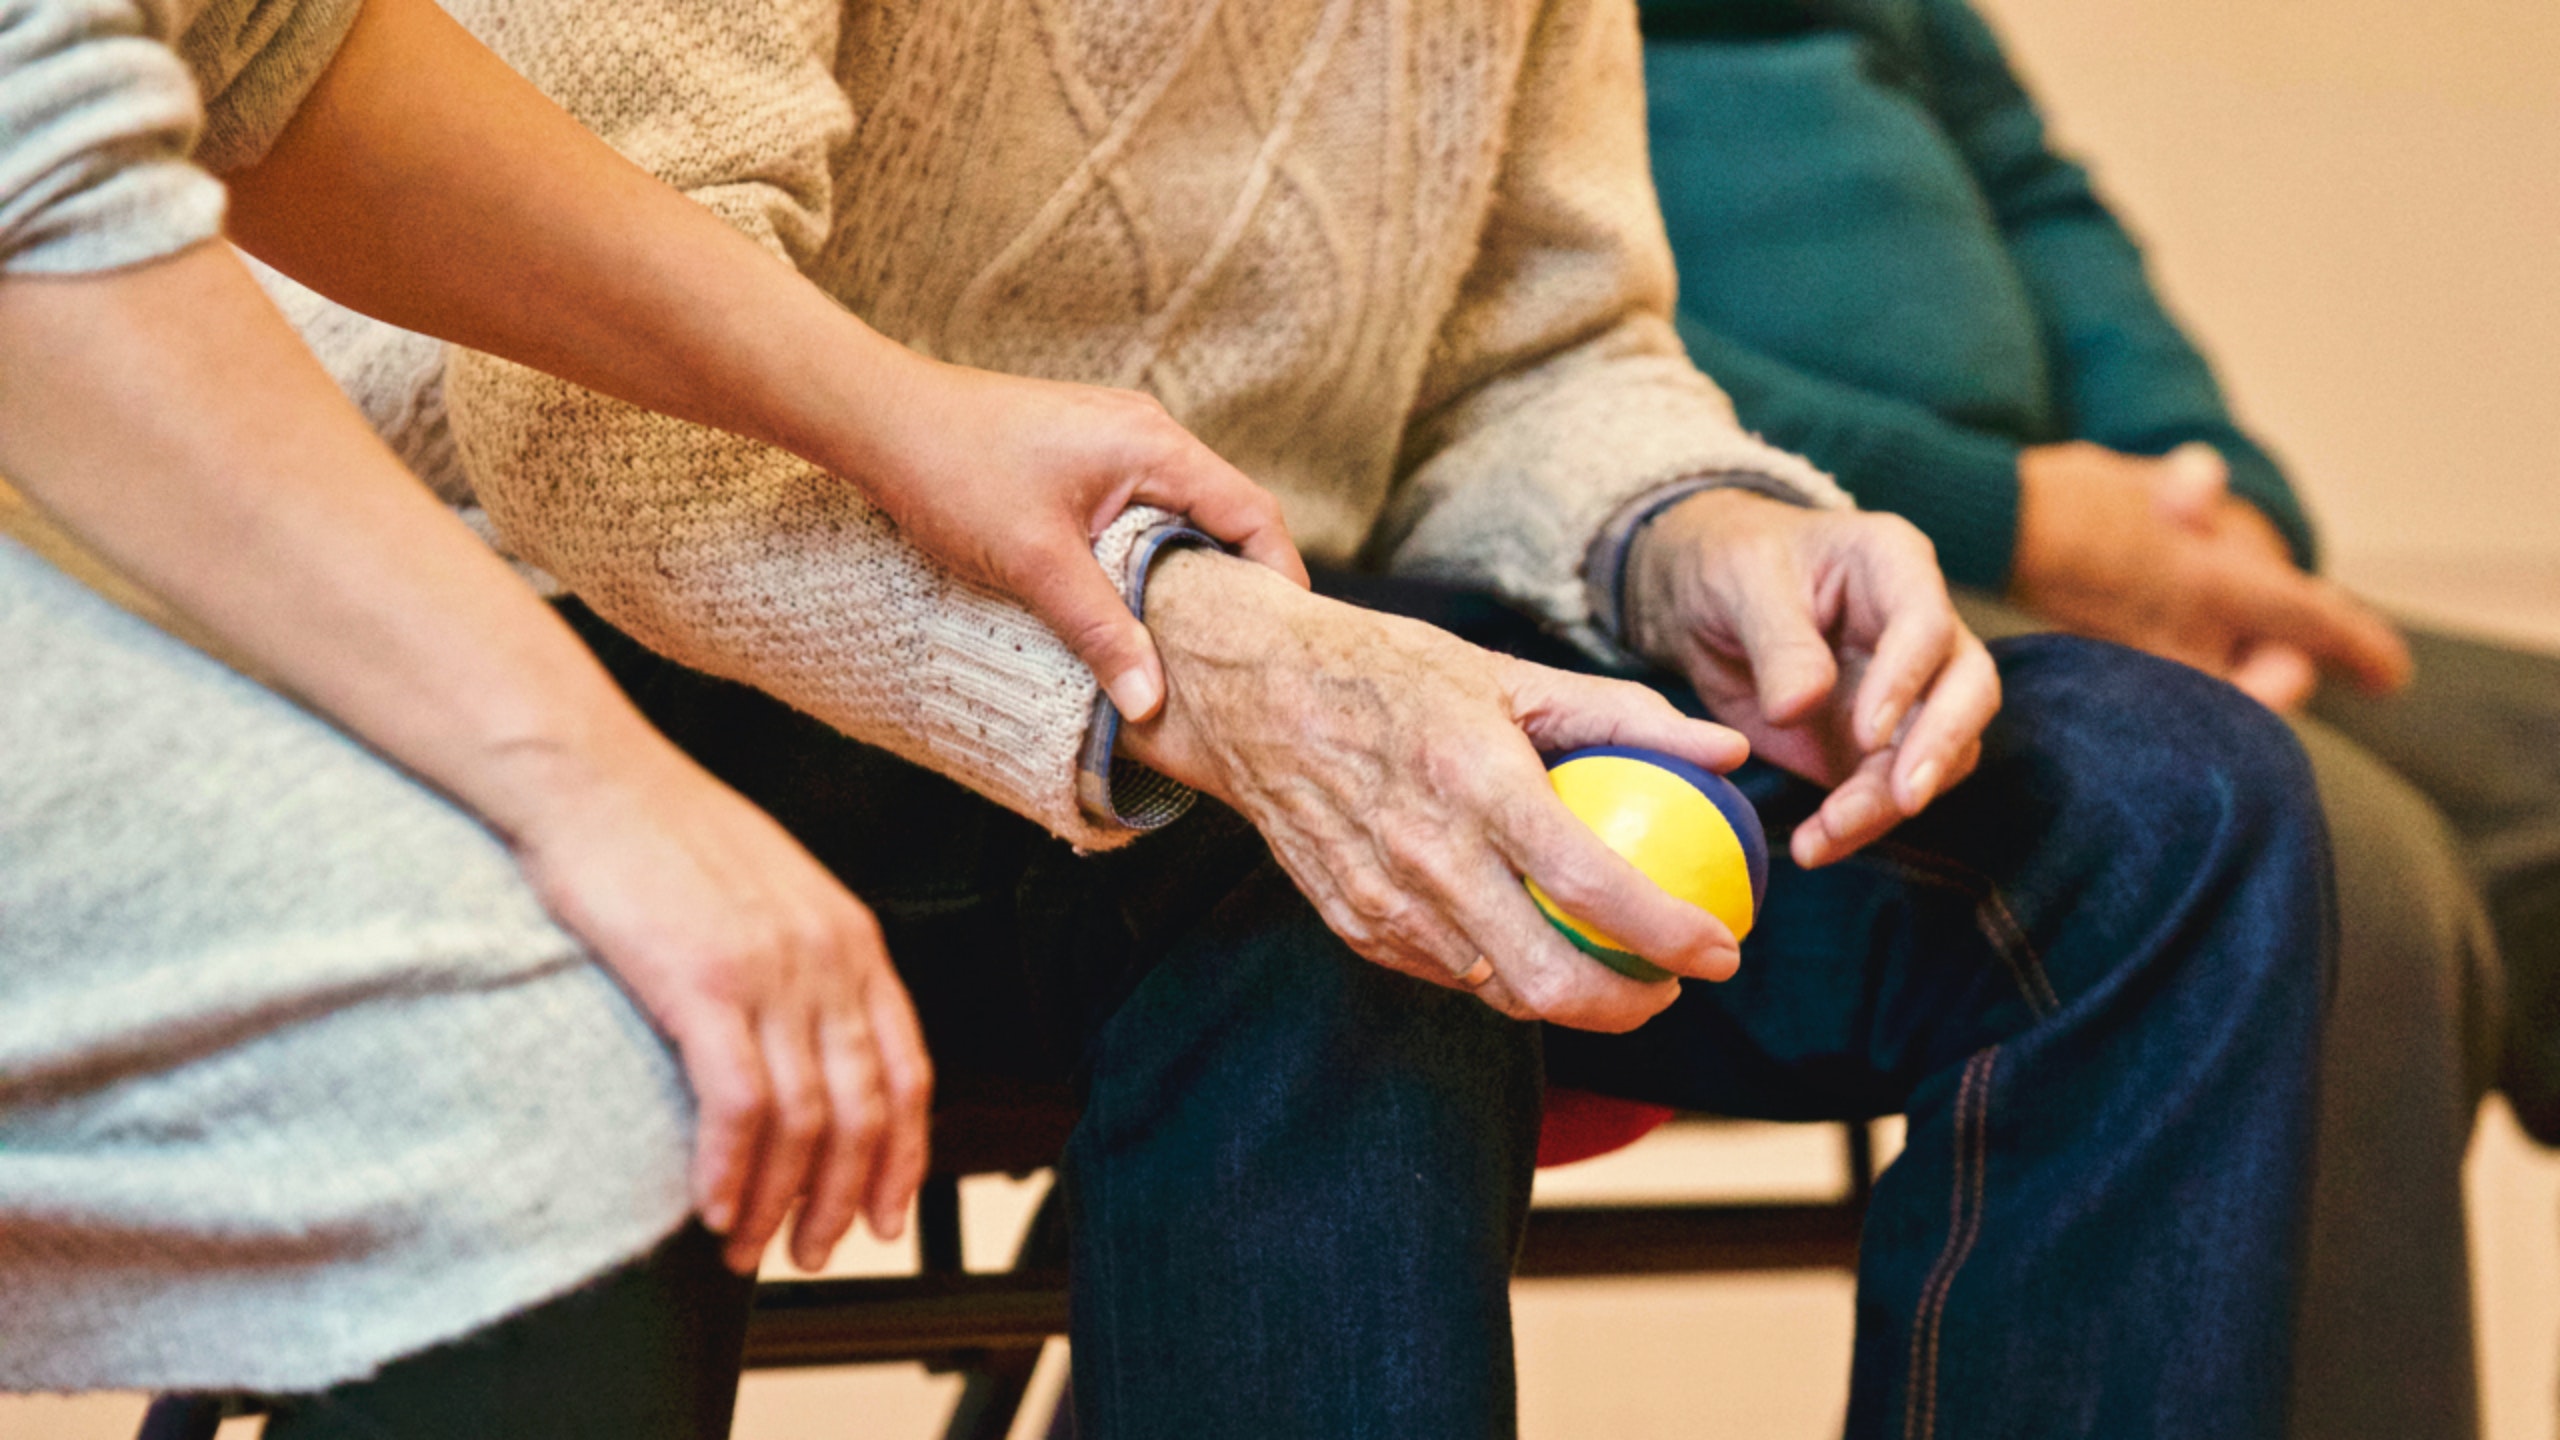 An older man in a sweater holds a ball. A woman in the foreground puts her hand on his wrist.